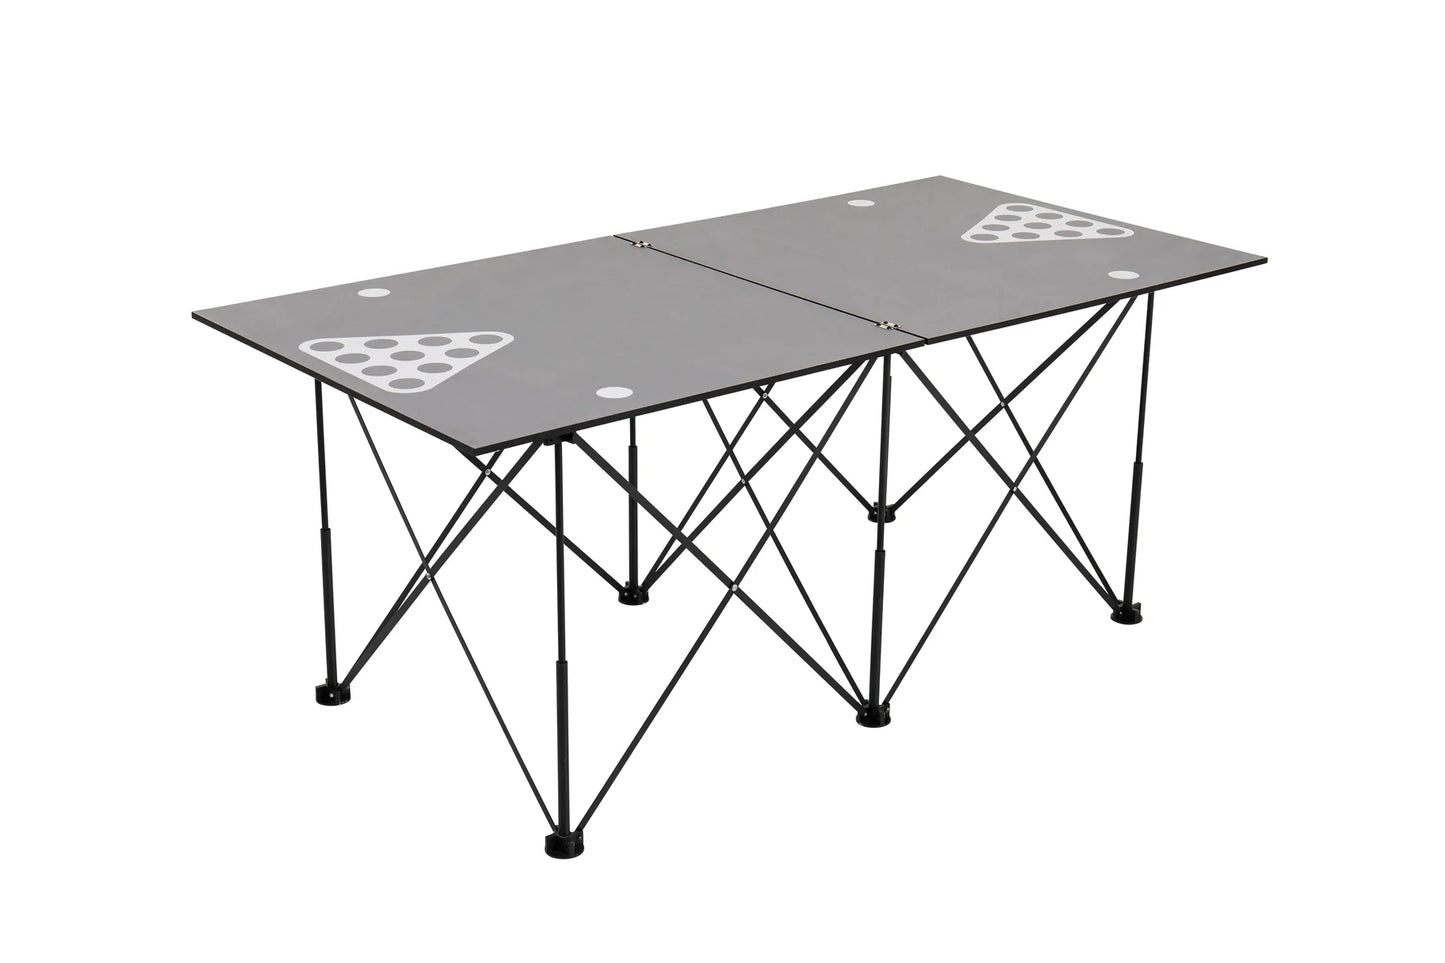 Pop Up 6 Foot Table Tennis with Net